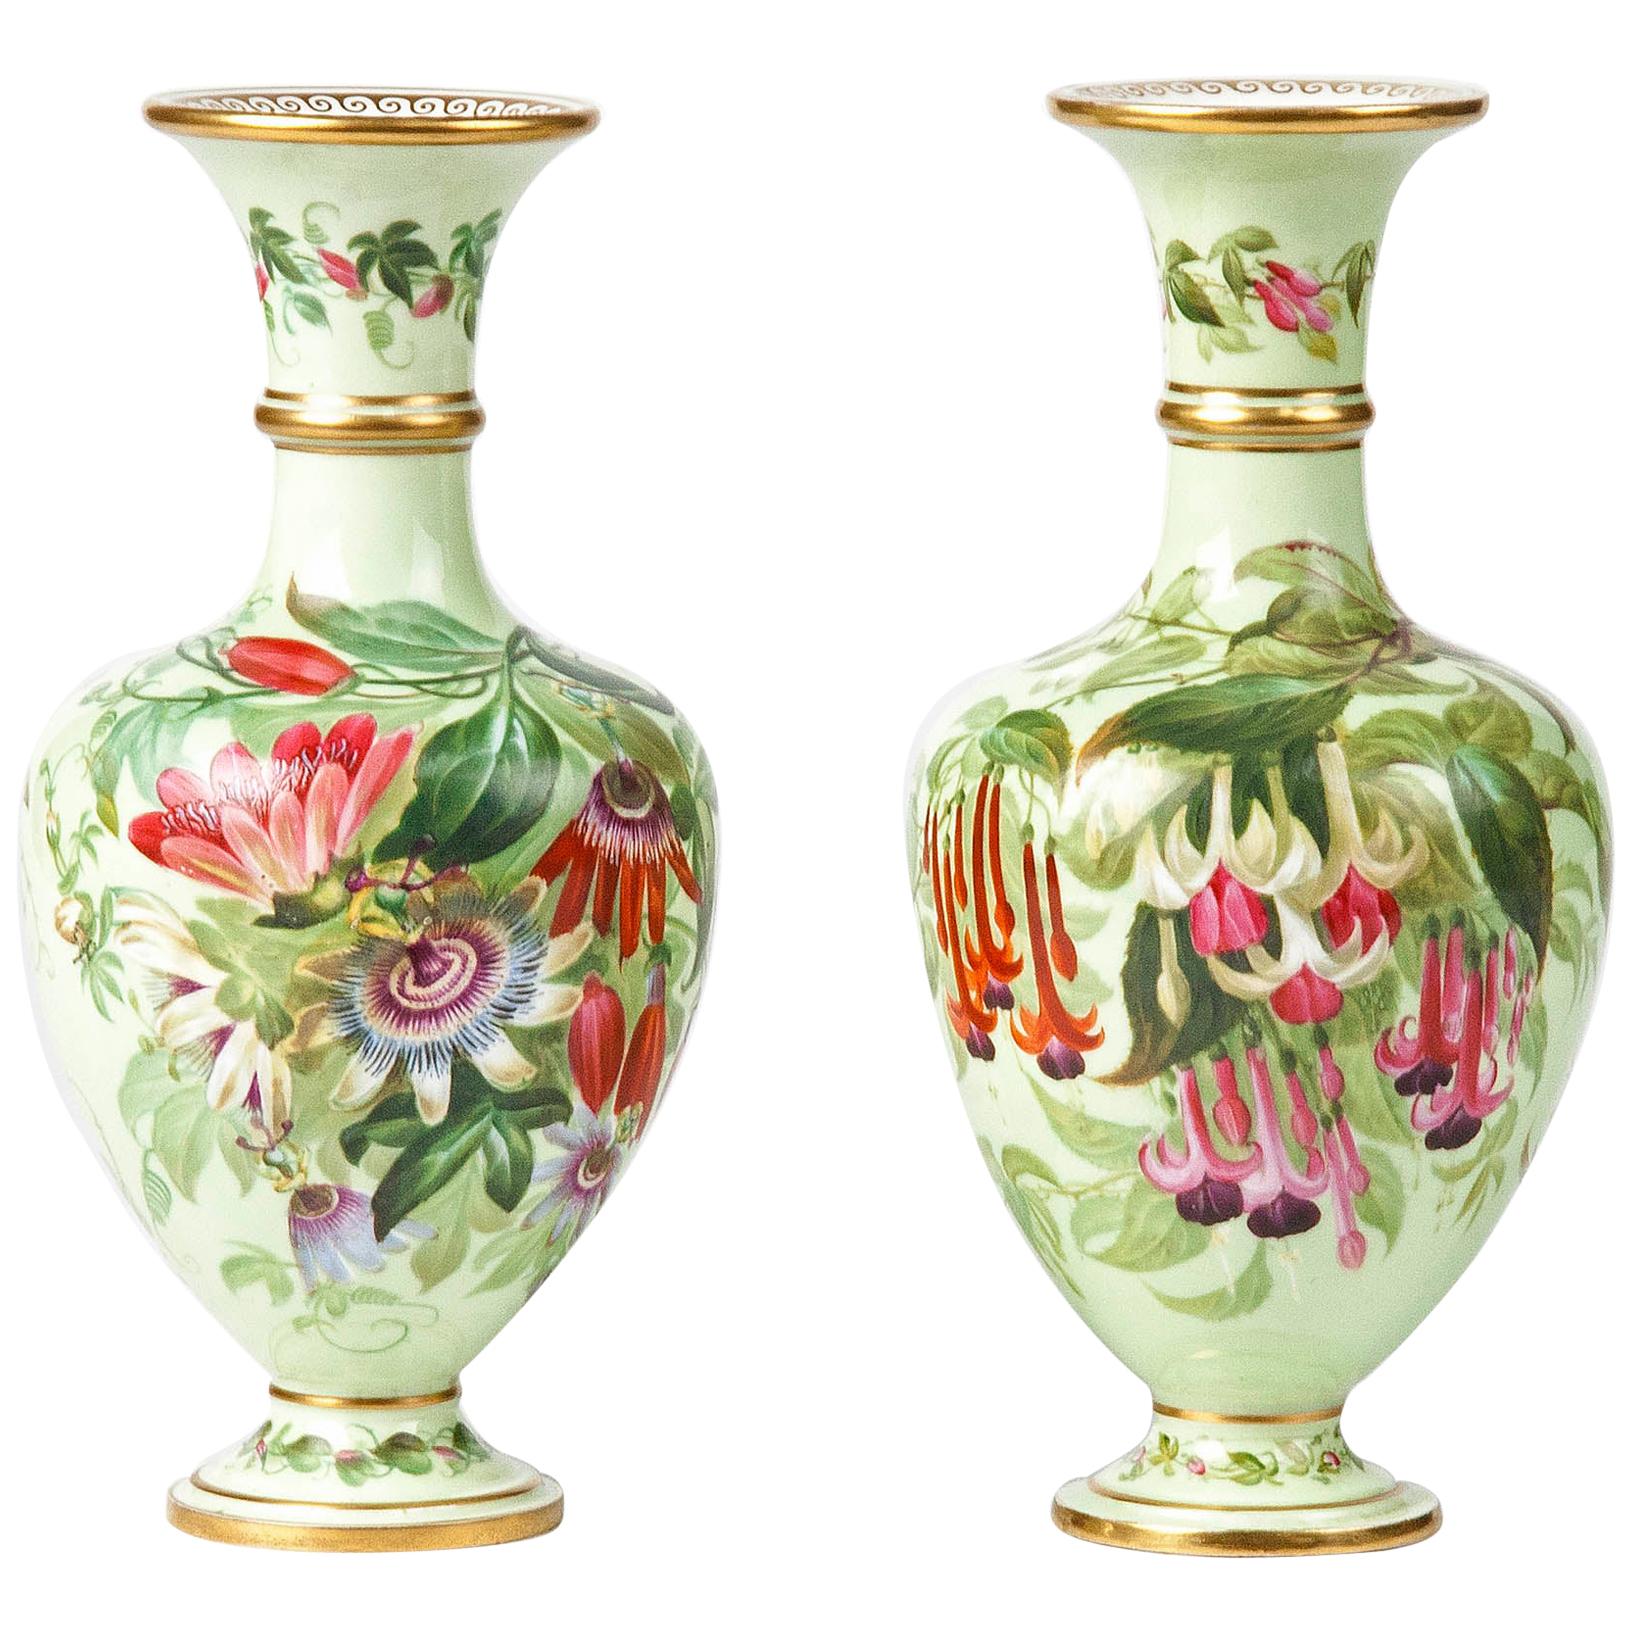 Pair of 19th Century Flower Vases Made by Copeland